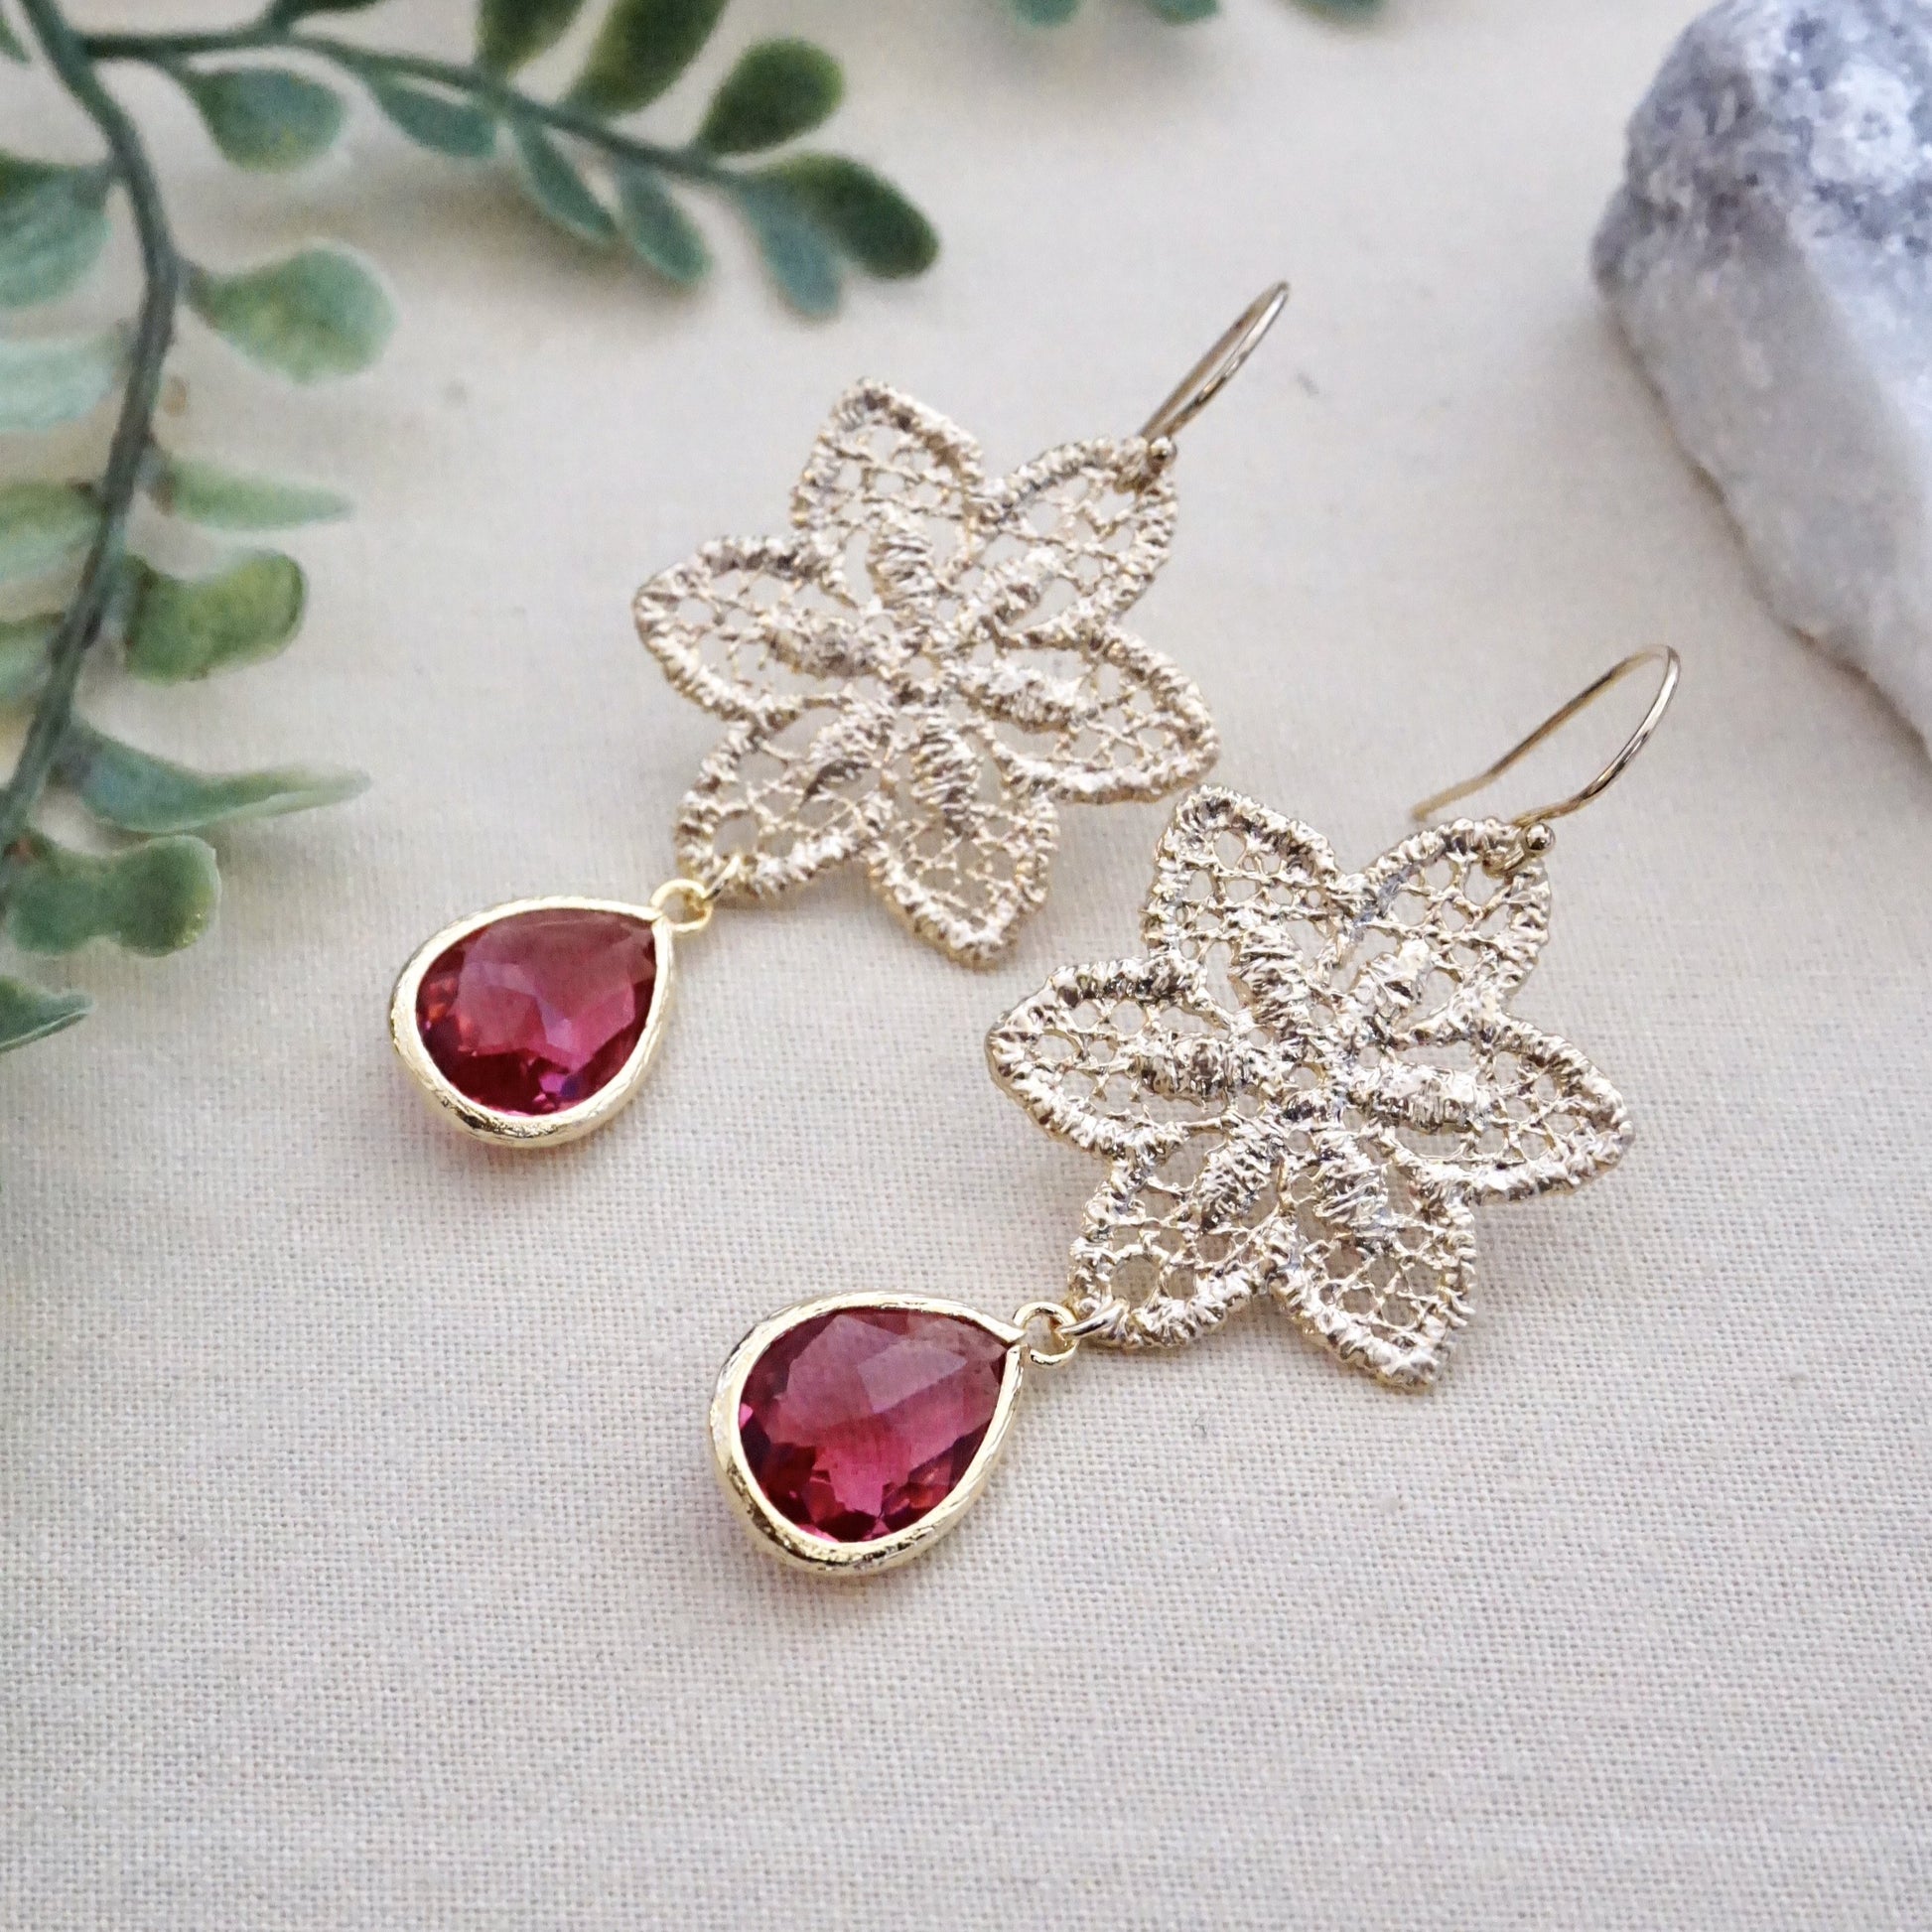 Statement Red Earrings for the Holidays